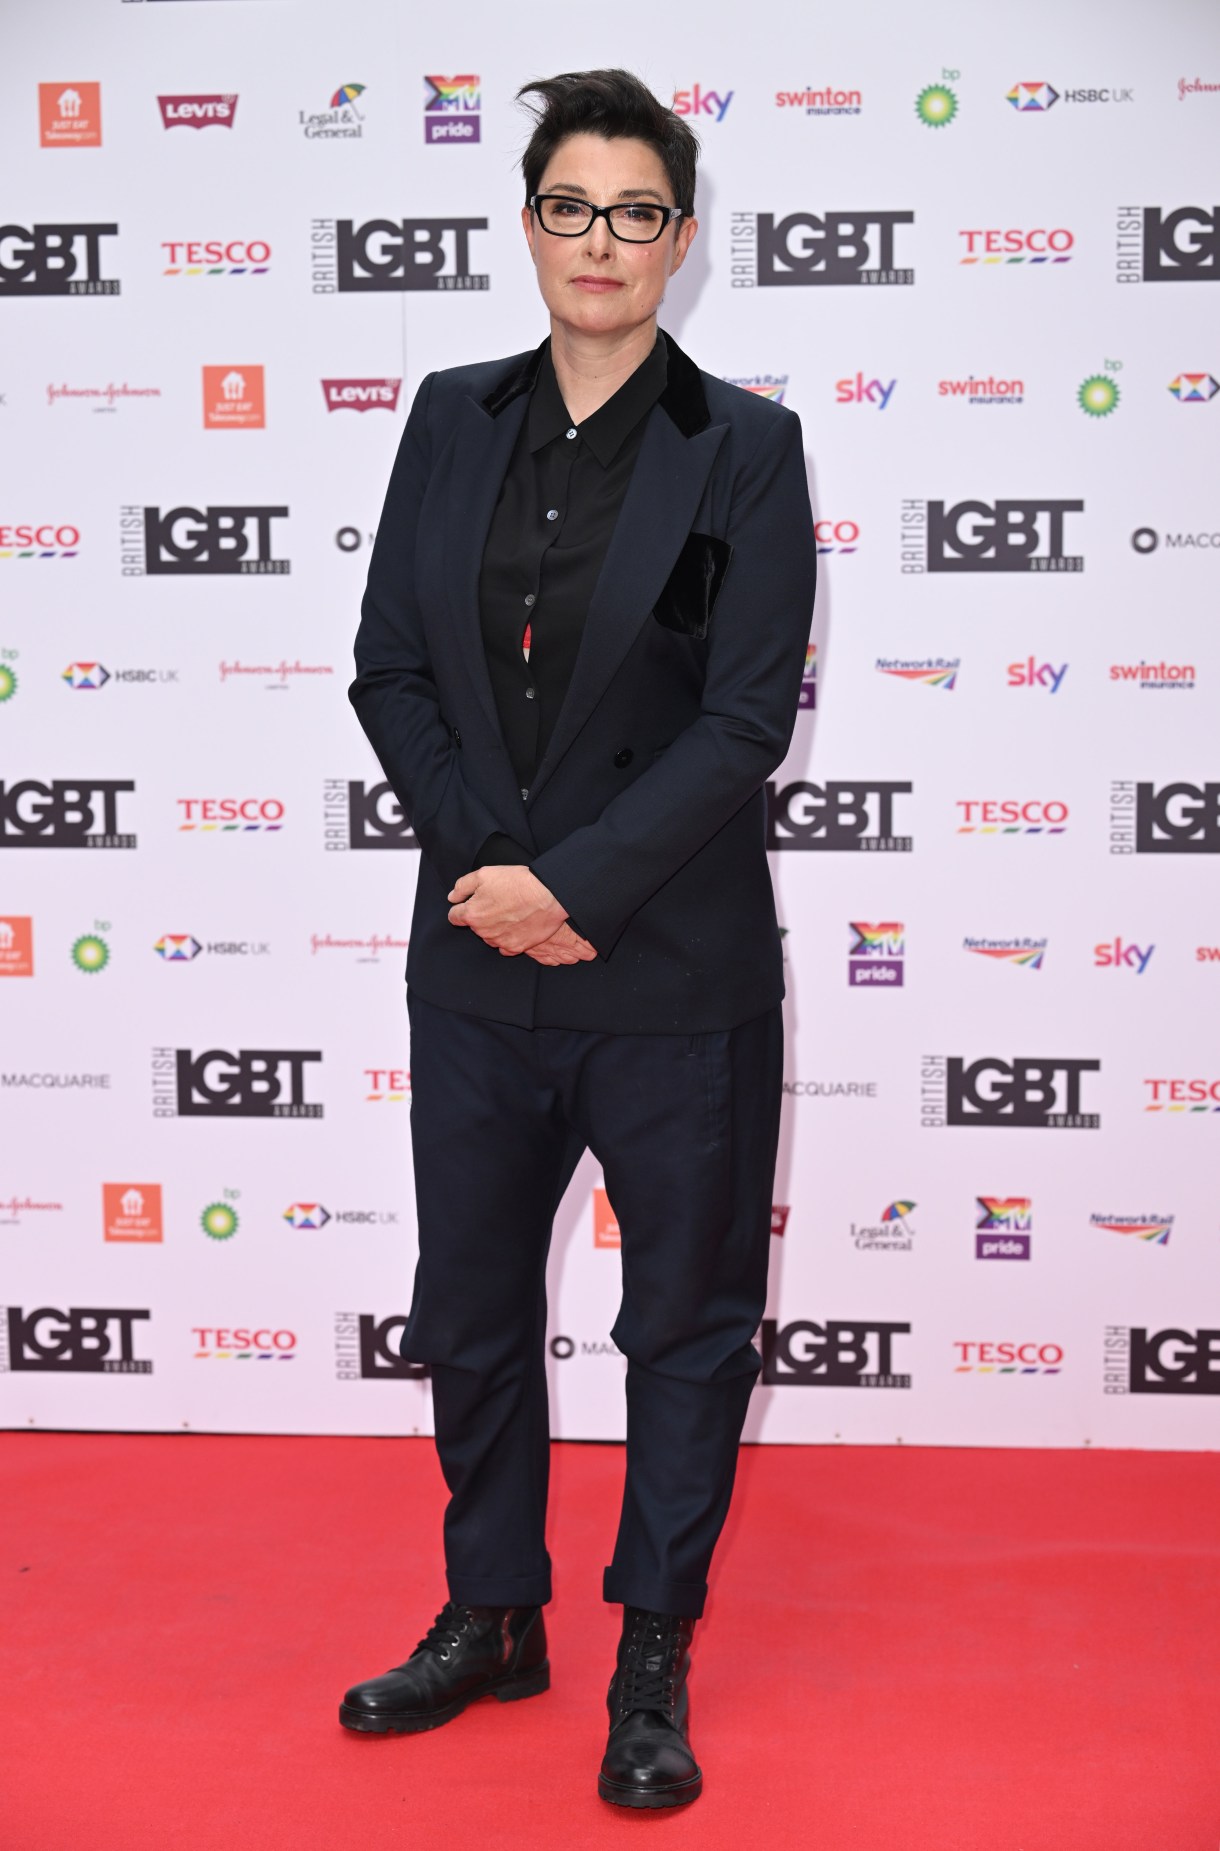 Sue Perkins in a navy blue suit